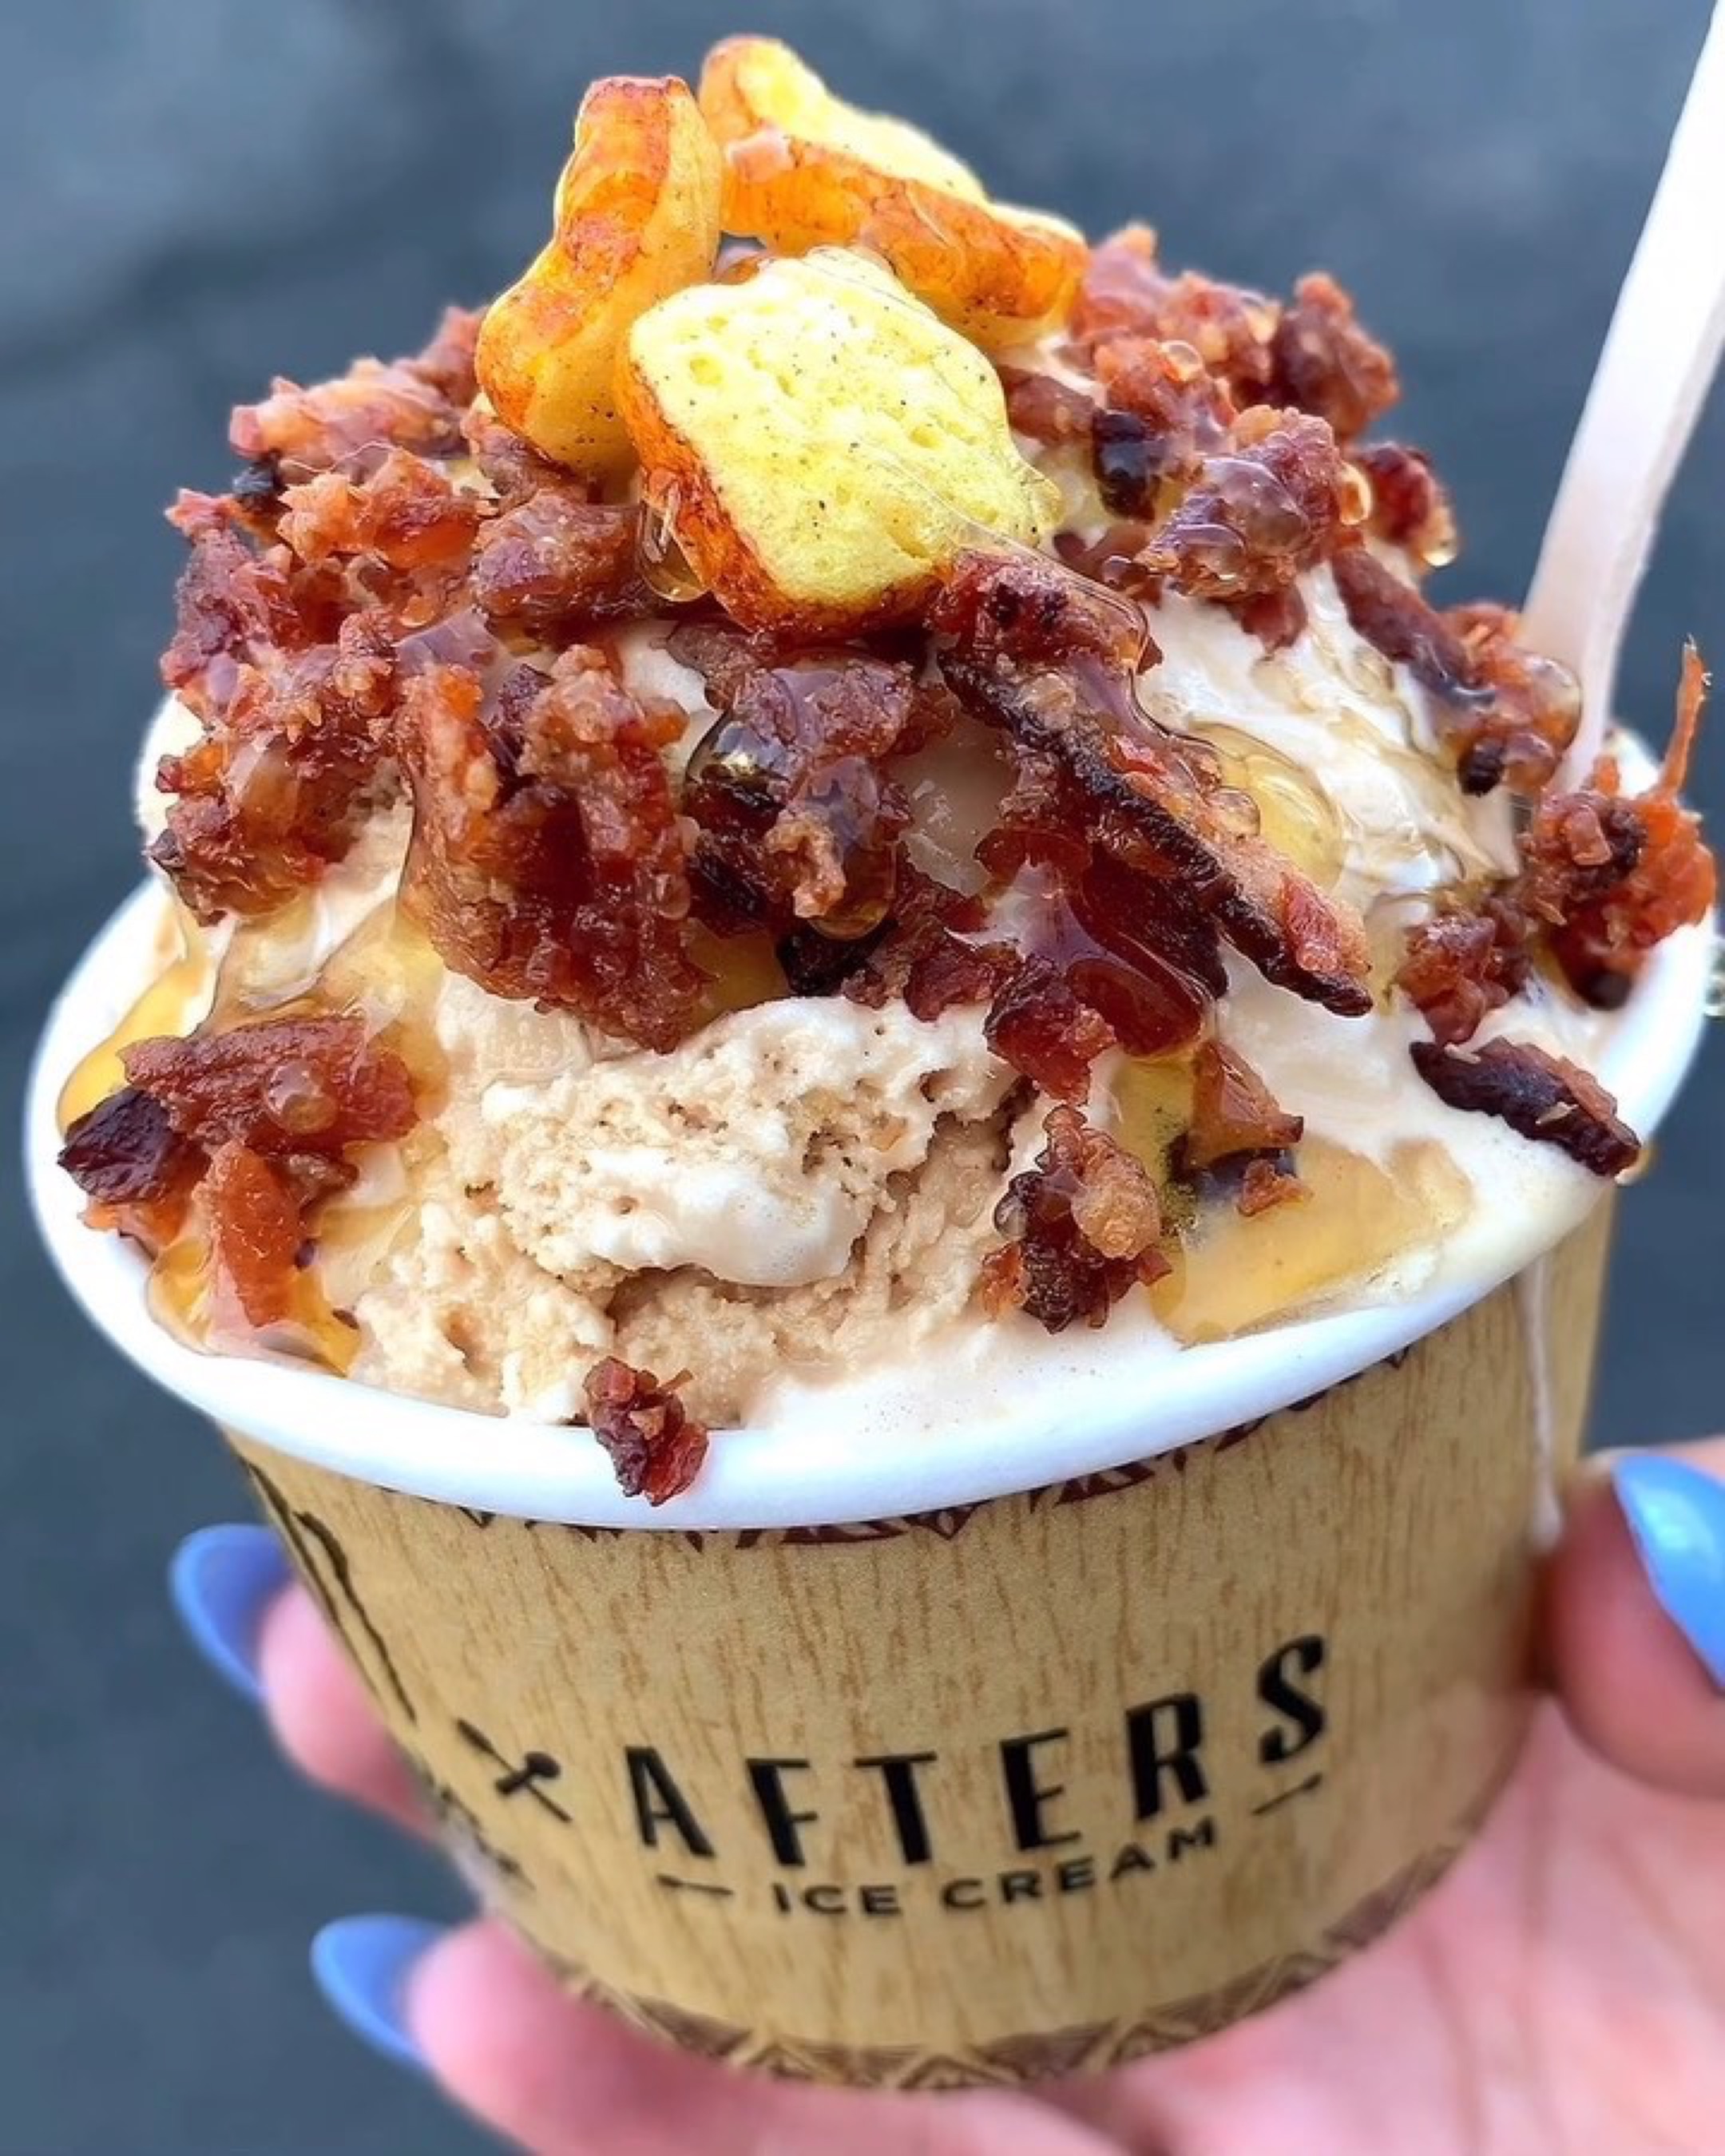 afters ice cream locations